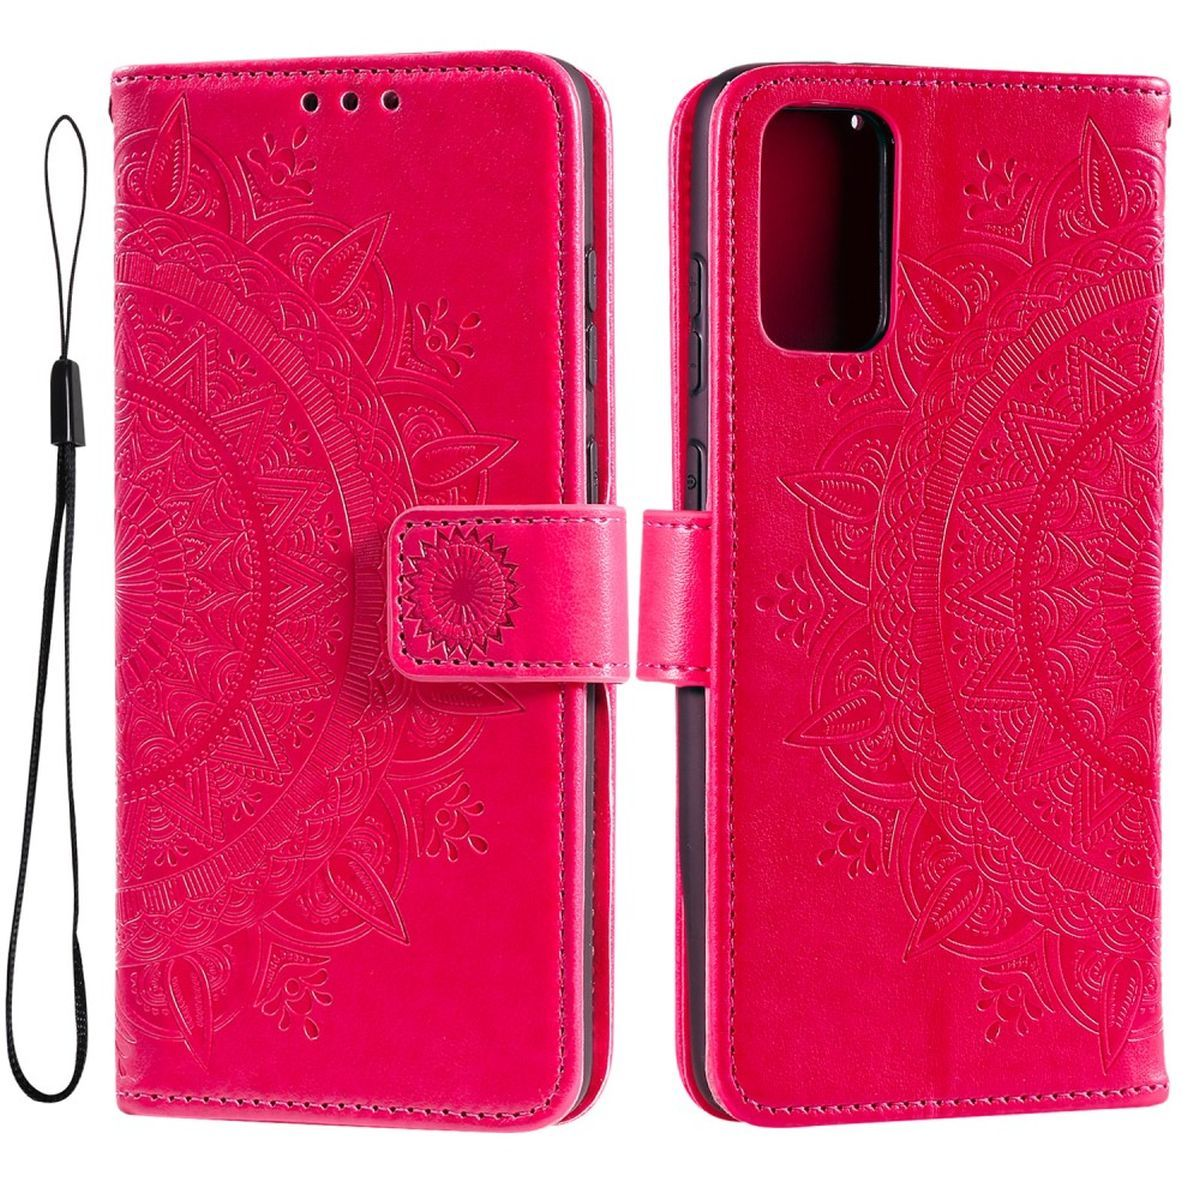 COVERKINGZ Klapphülle mit Mandala Muster, Galaxy Samsung, M23 Bookcover, Pink 5G